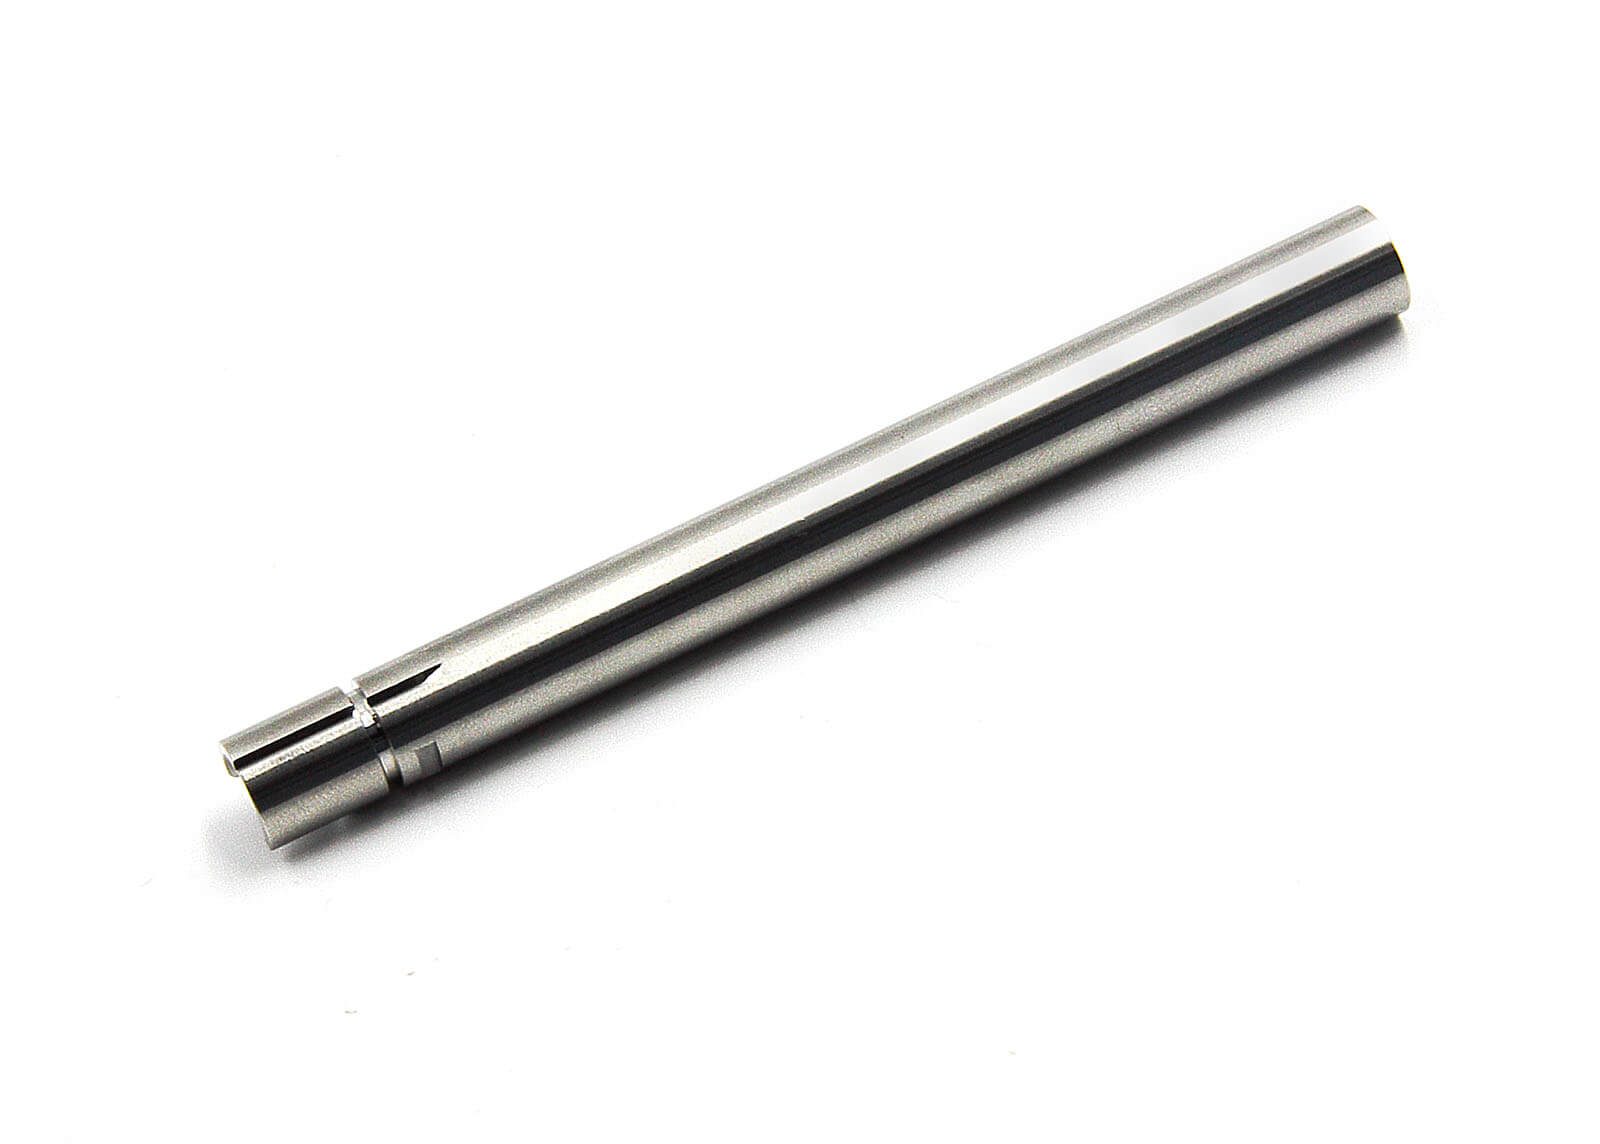 Stainless Steel 6.03mm Precision GBB Inner Barrel 91mm - Modify Airsoft parts